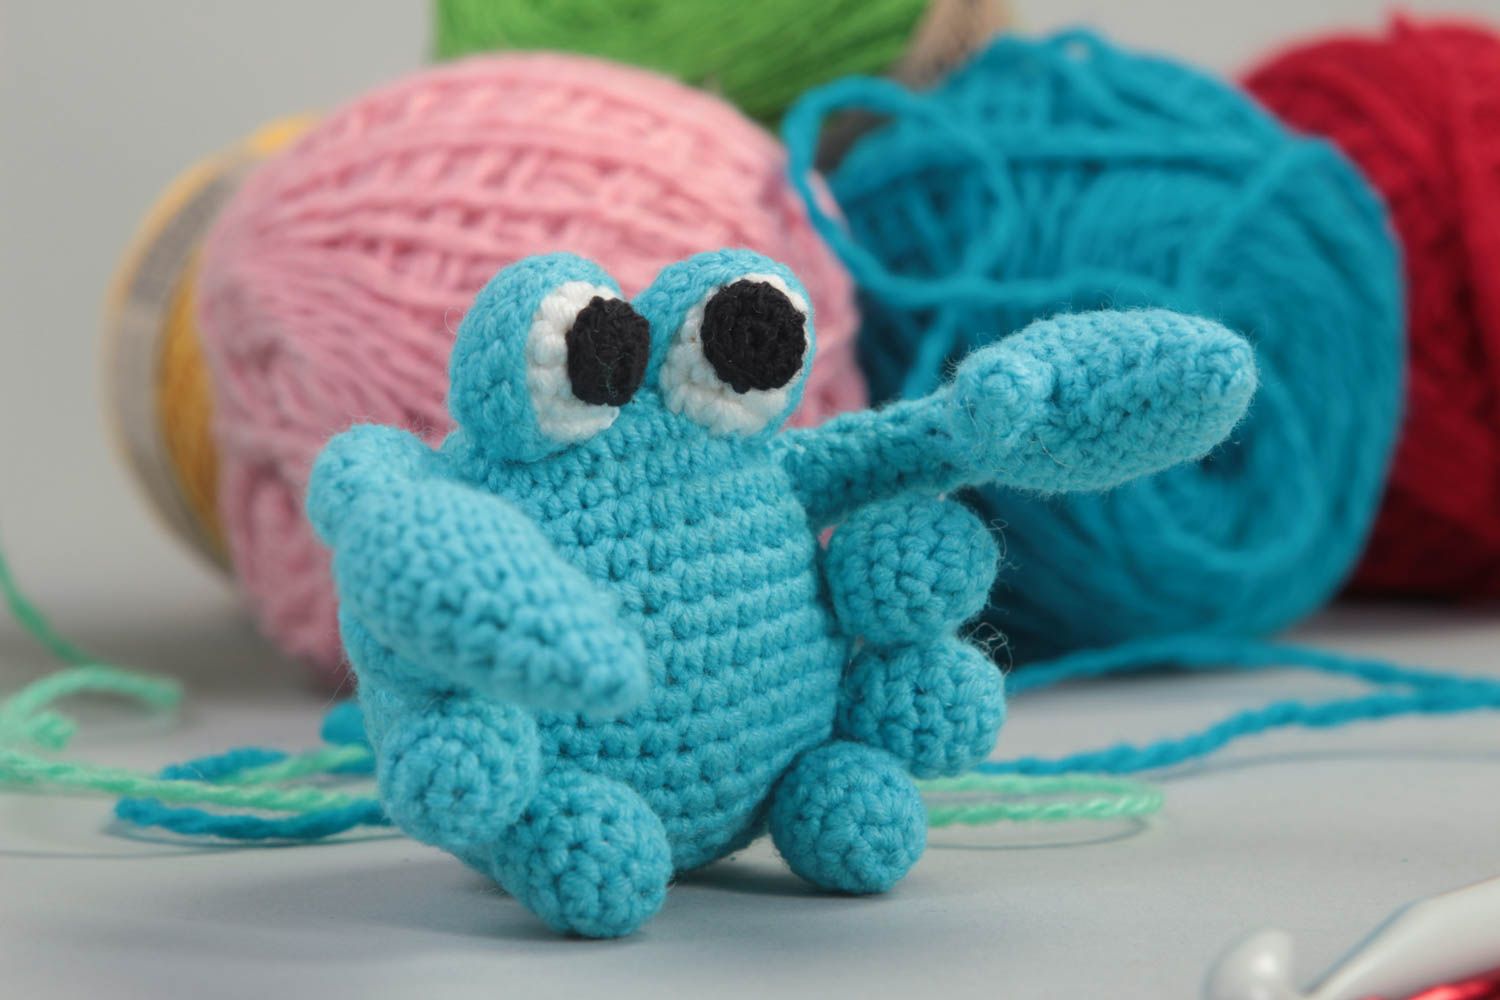 Cute handmade crochet toy soft toy for kids stuffed toy birthday gift ideas photo 1